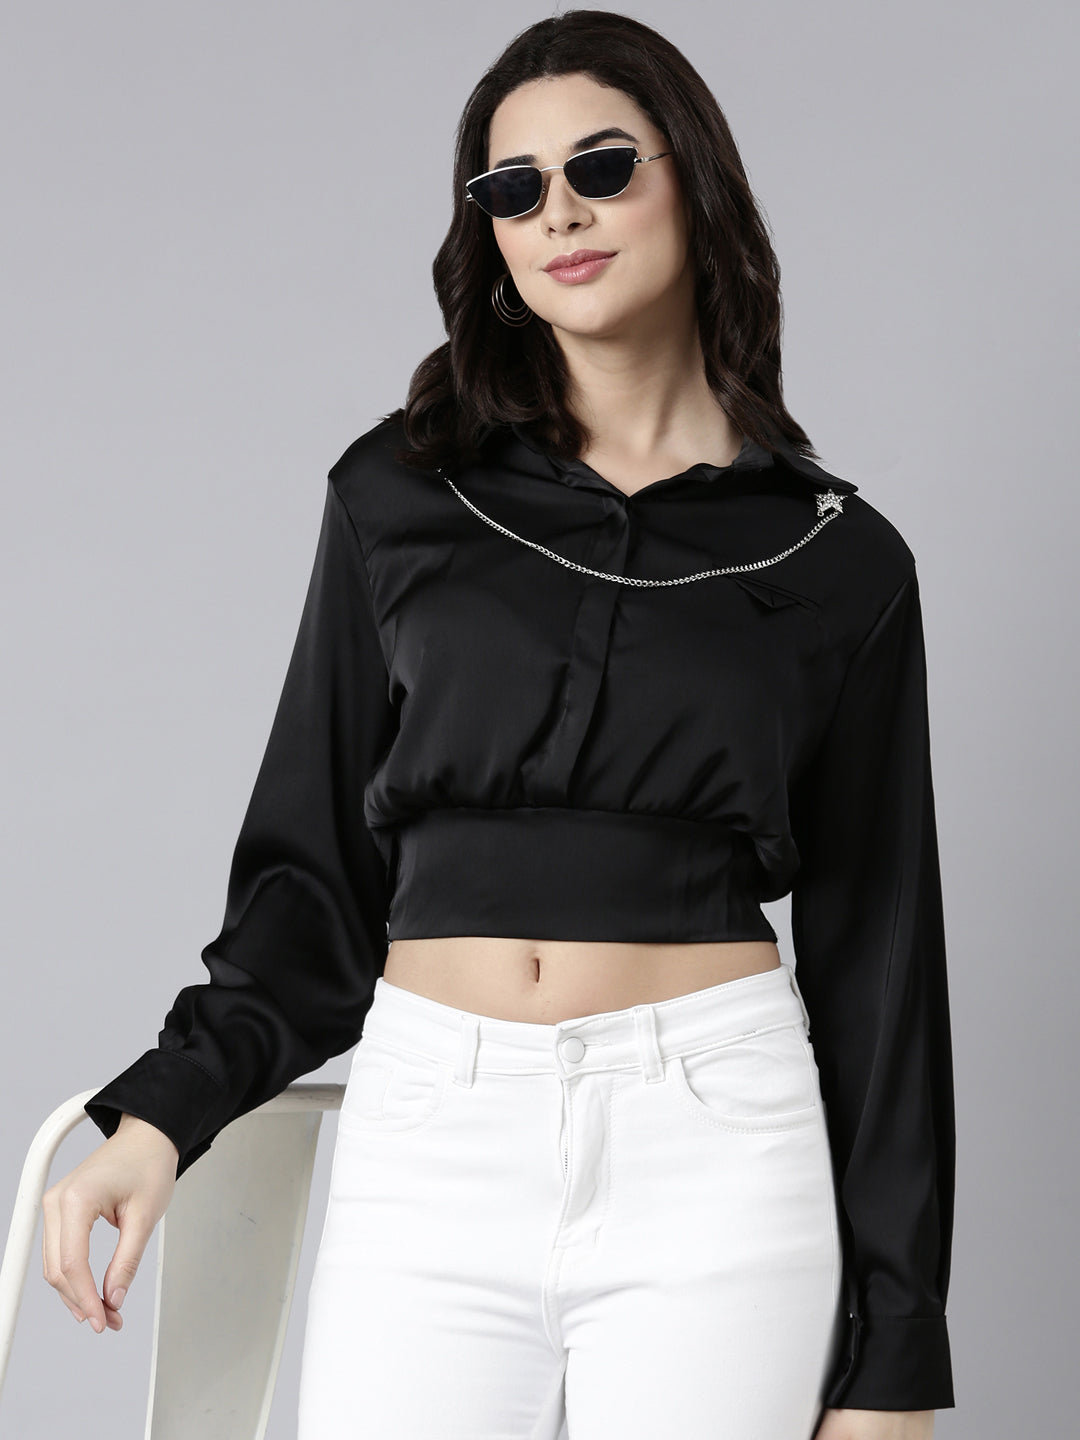 Women Solid Black Blouson Top Comes with Neck Chain